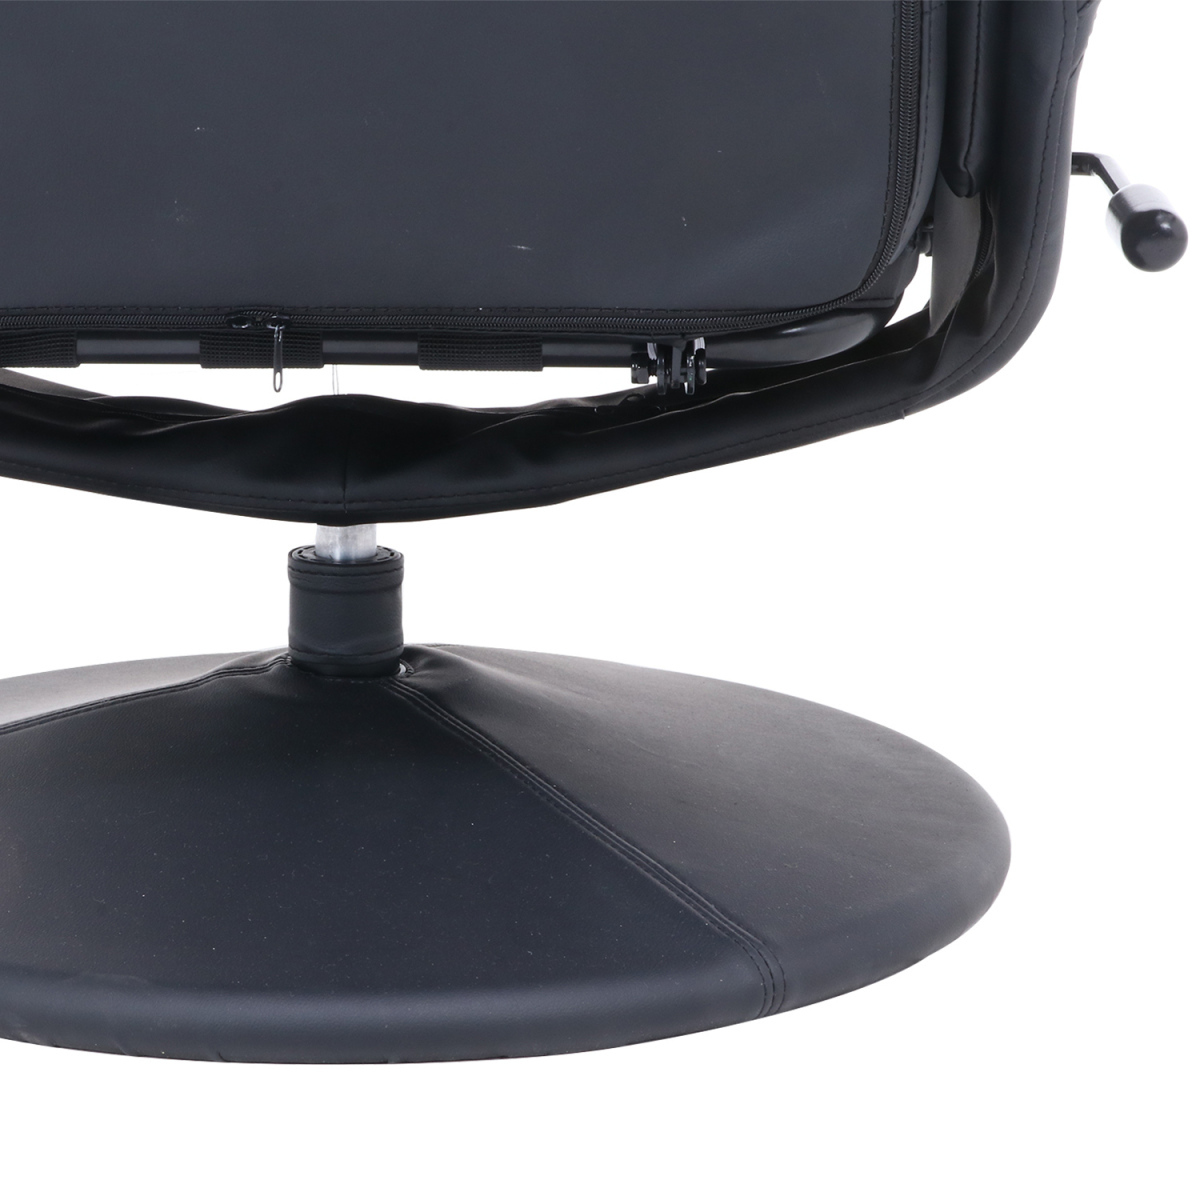  personal ge-ming chair foot less attaching black [ new goods ][ free shipping ]( Hokkaido Okinawa remote island postage separately )